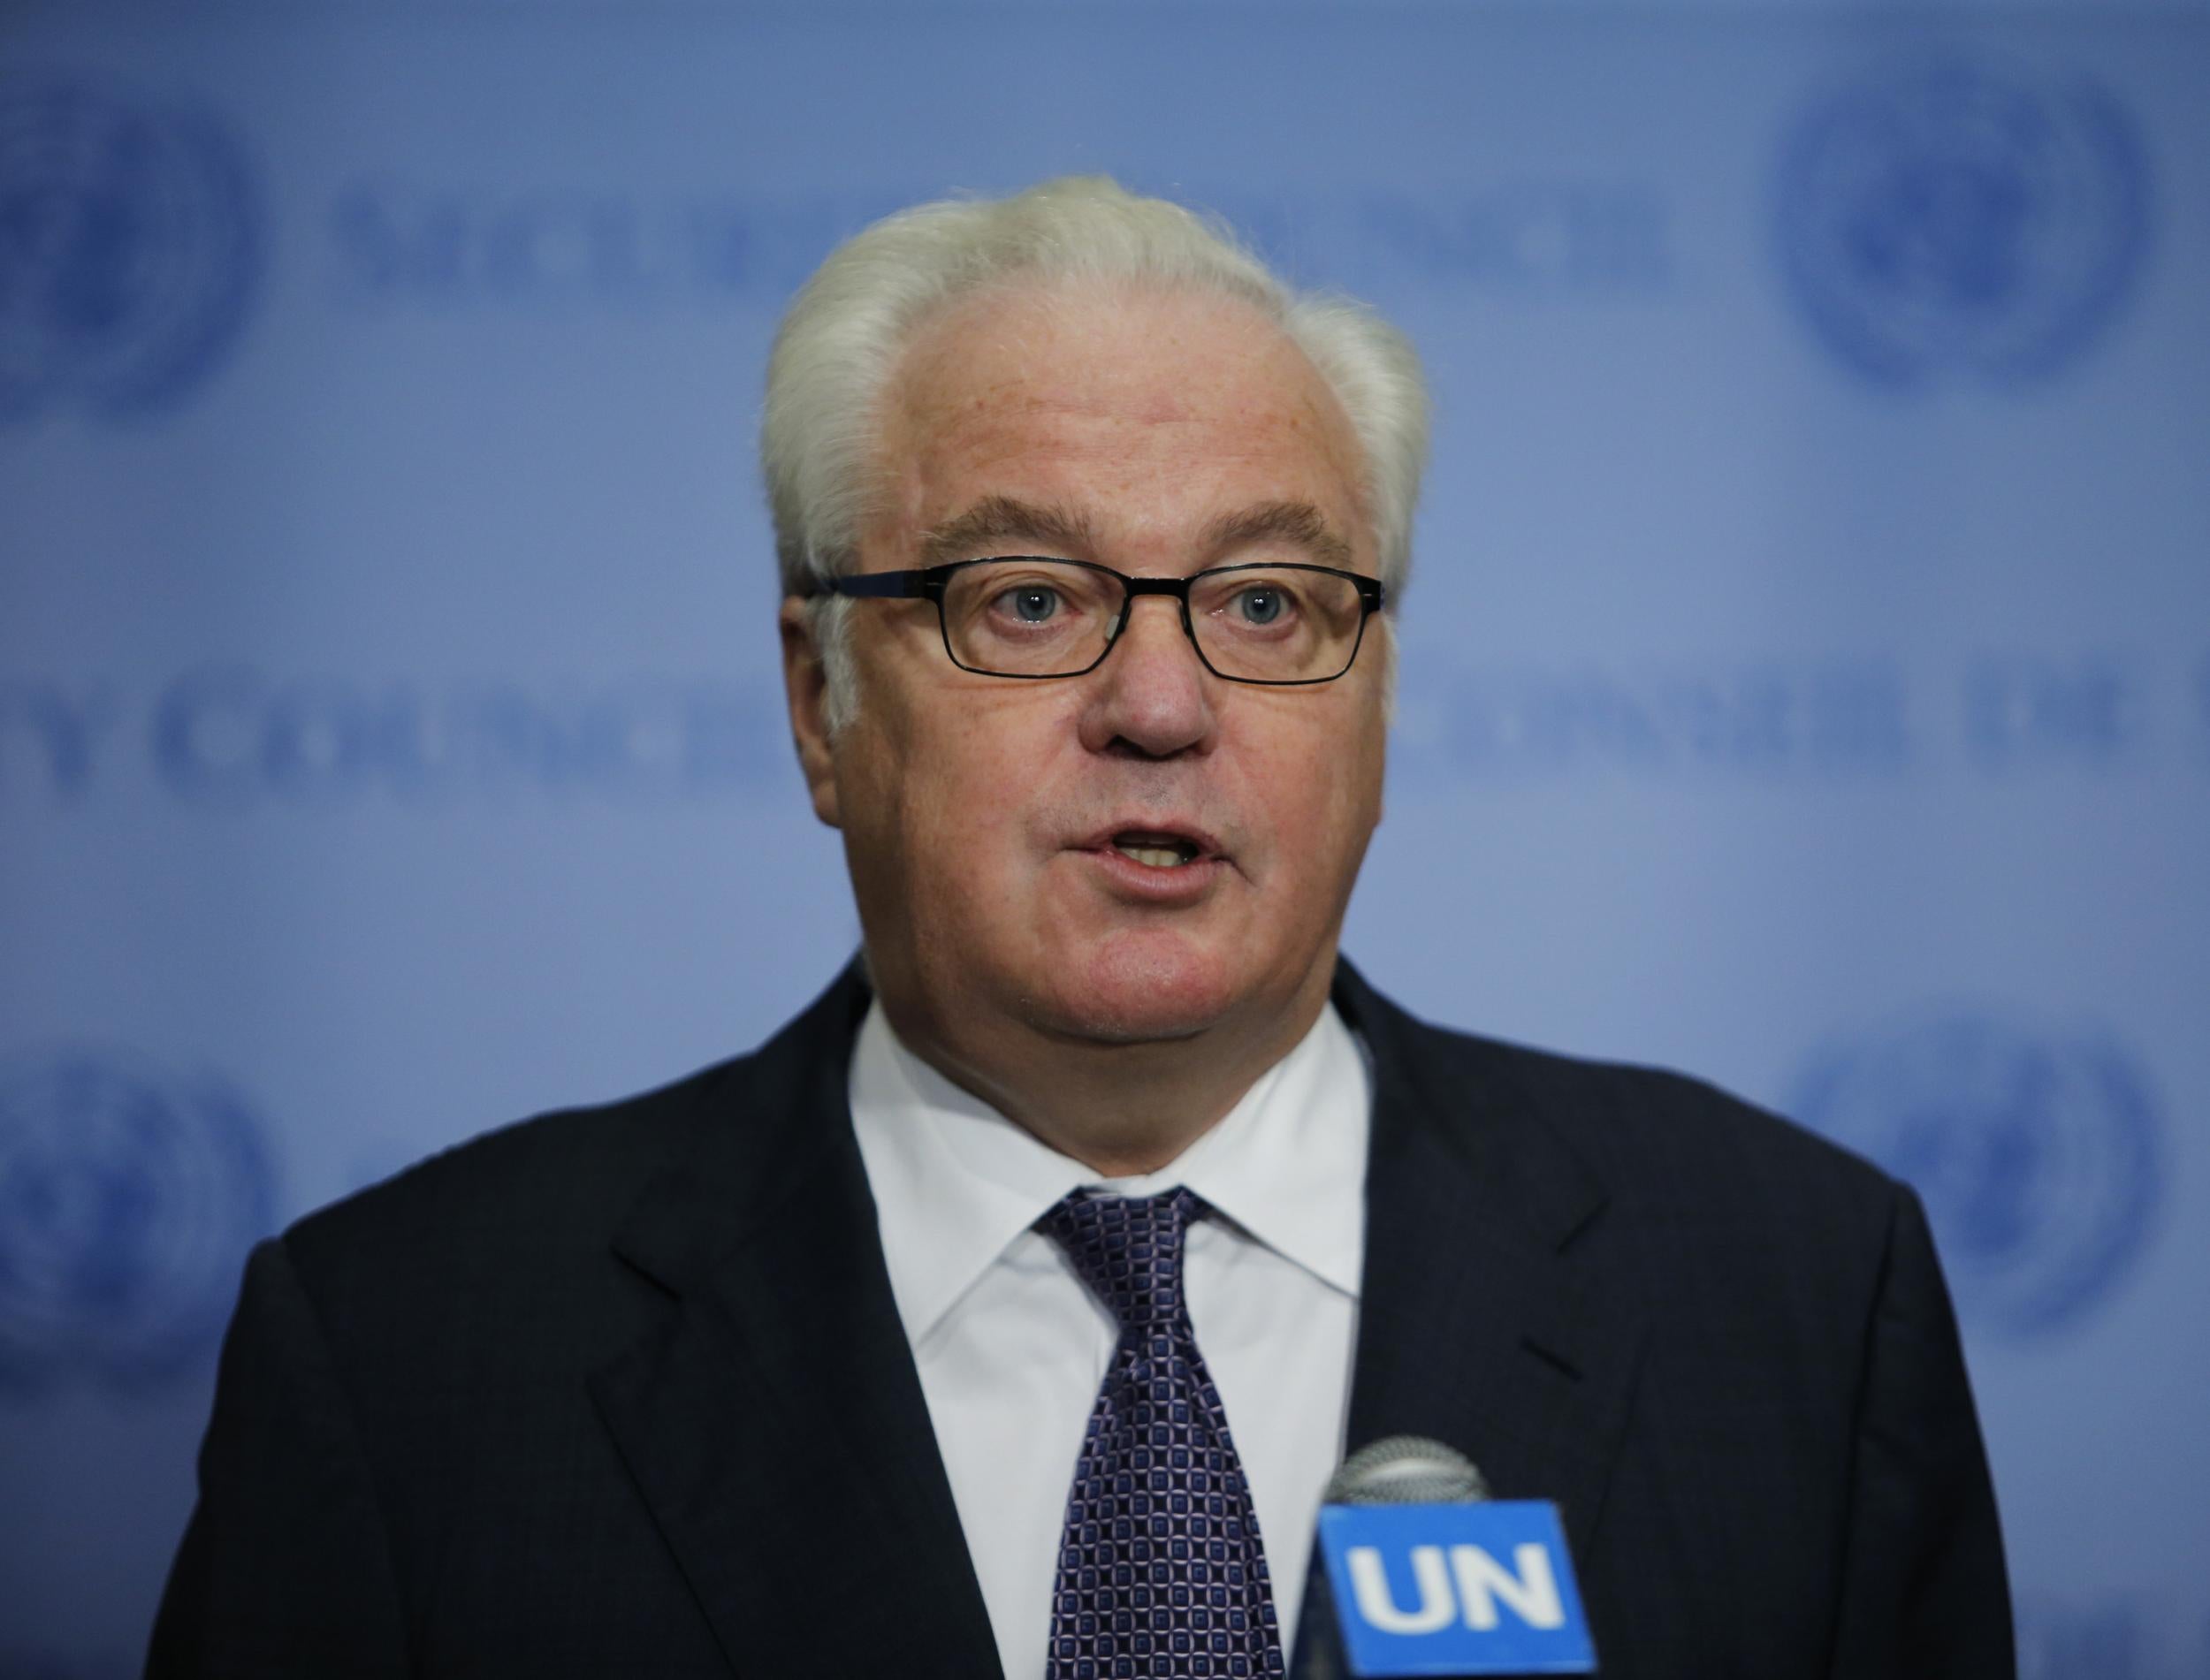 Russian Ambassador to the UN Vitaly Churkin died unexpectedly in New York